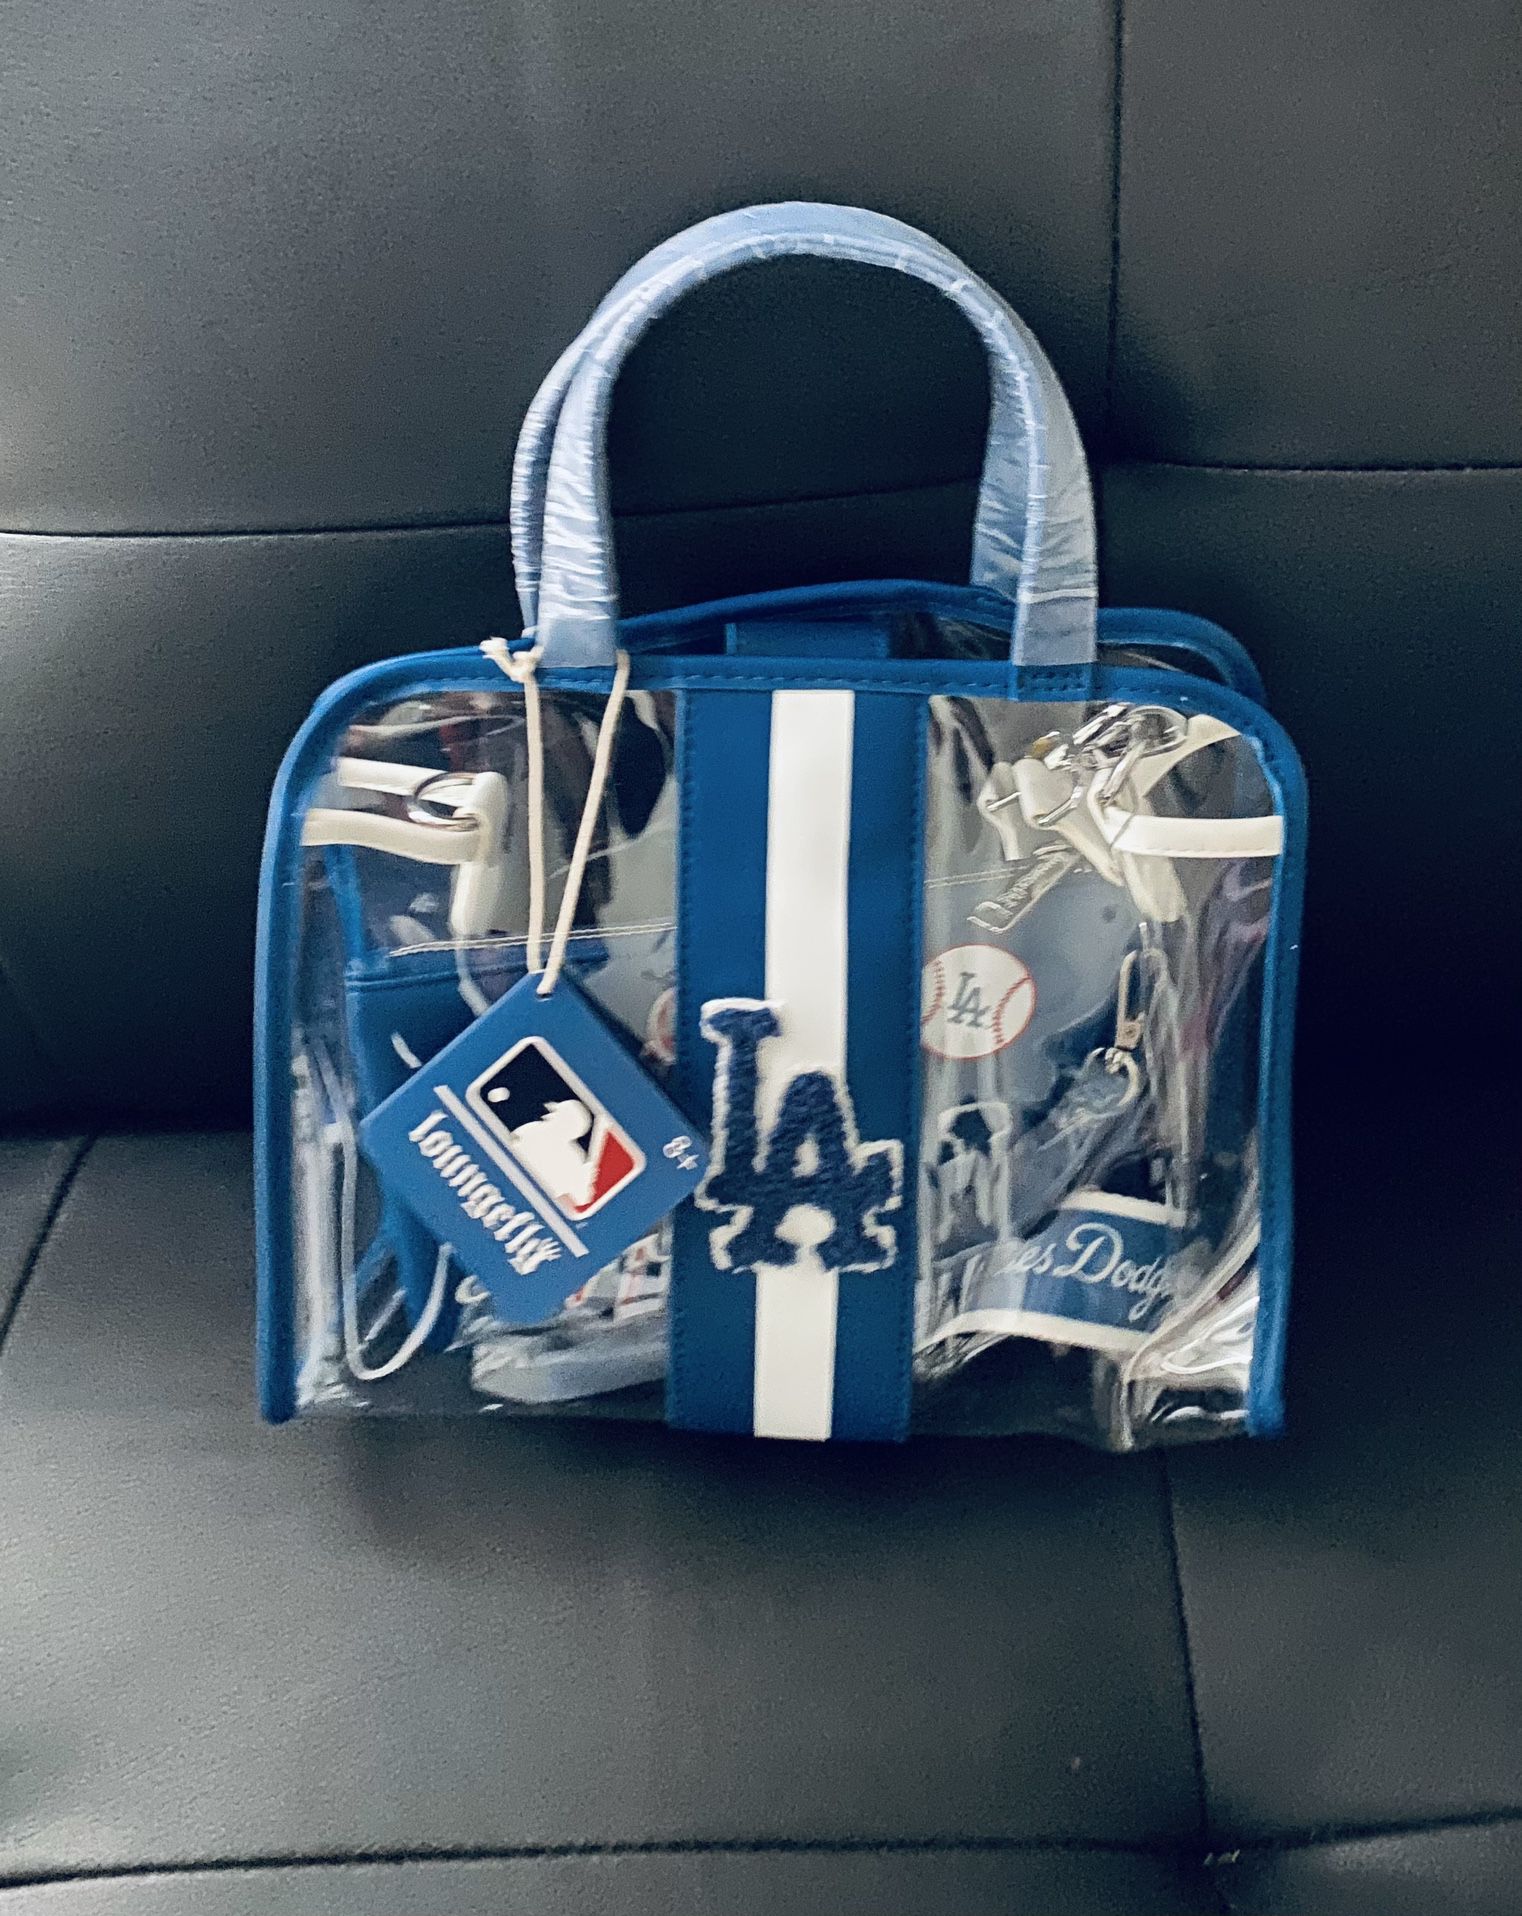 Stadium Approved Hello Kitty Dodger Clear Crossbody Bag for Sale in La  Verne, CA - OfferUp